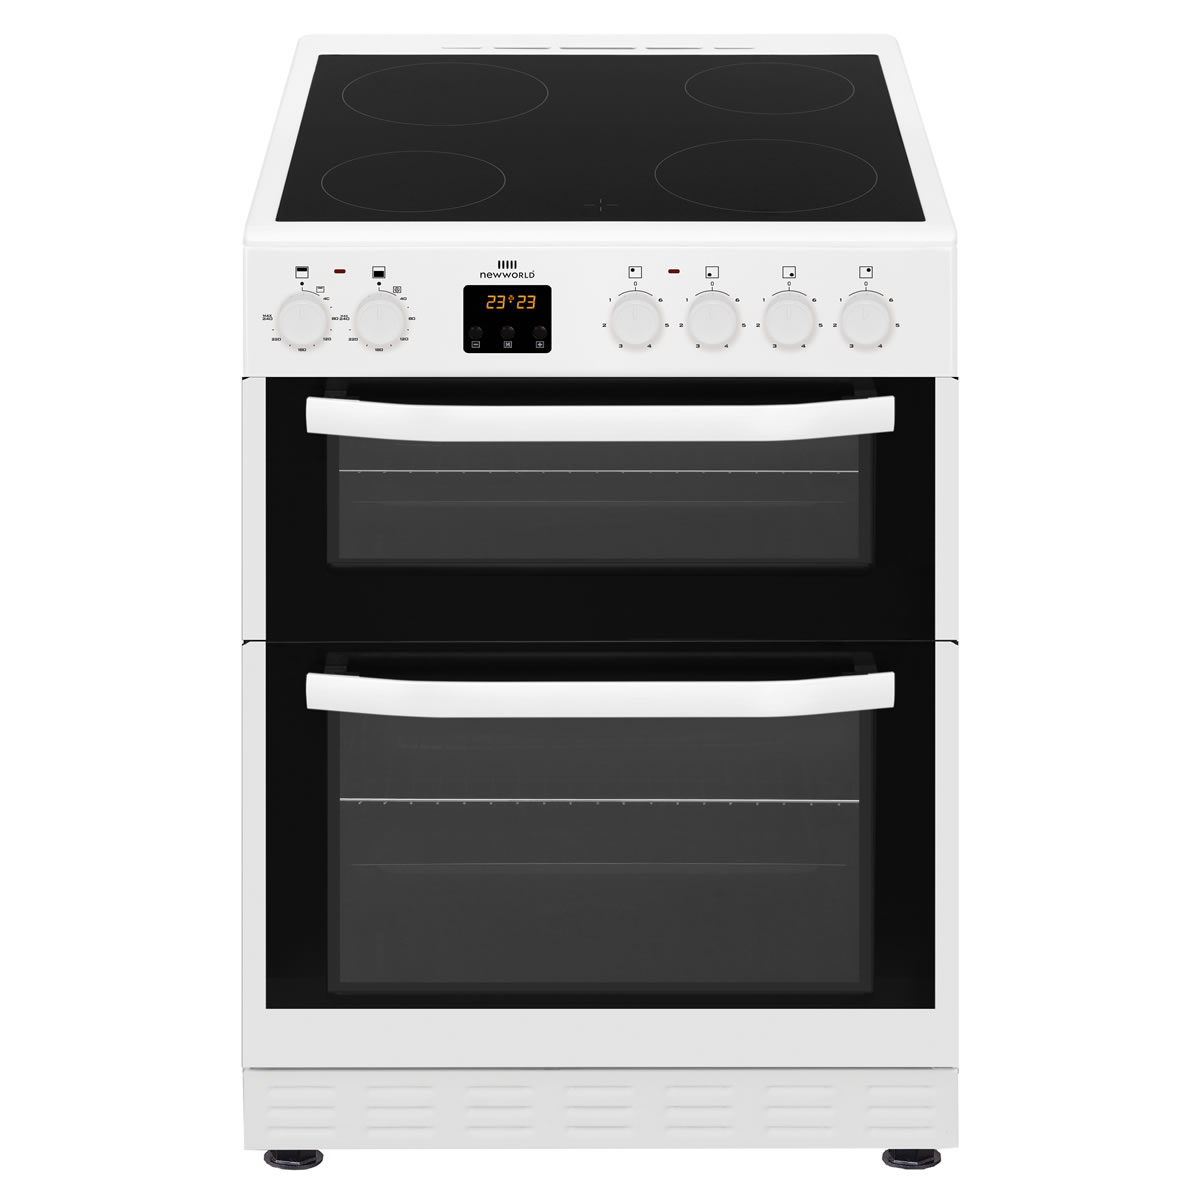 New-World 600mm Twin Cavity Electric Cooker Ceramic Hob White